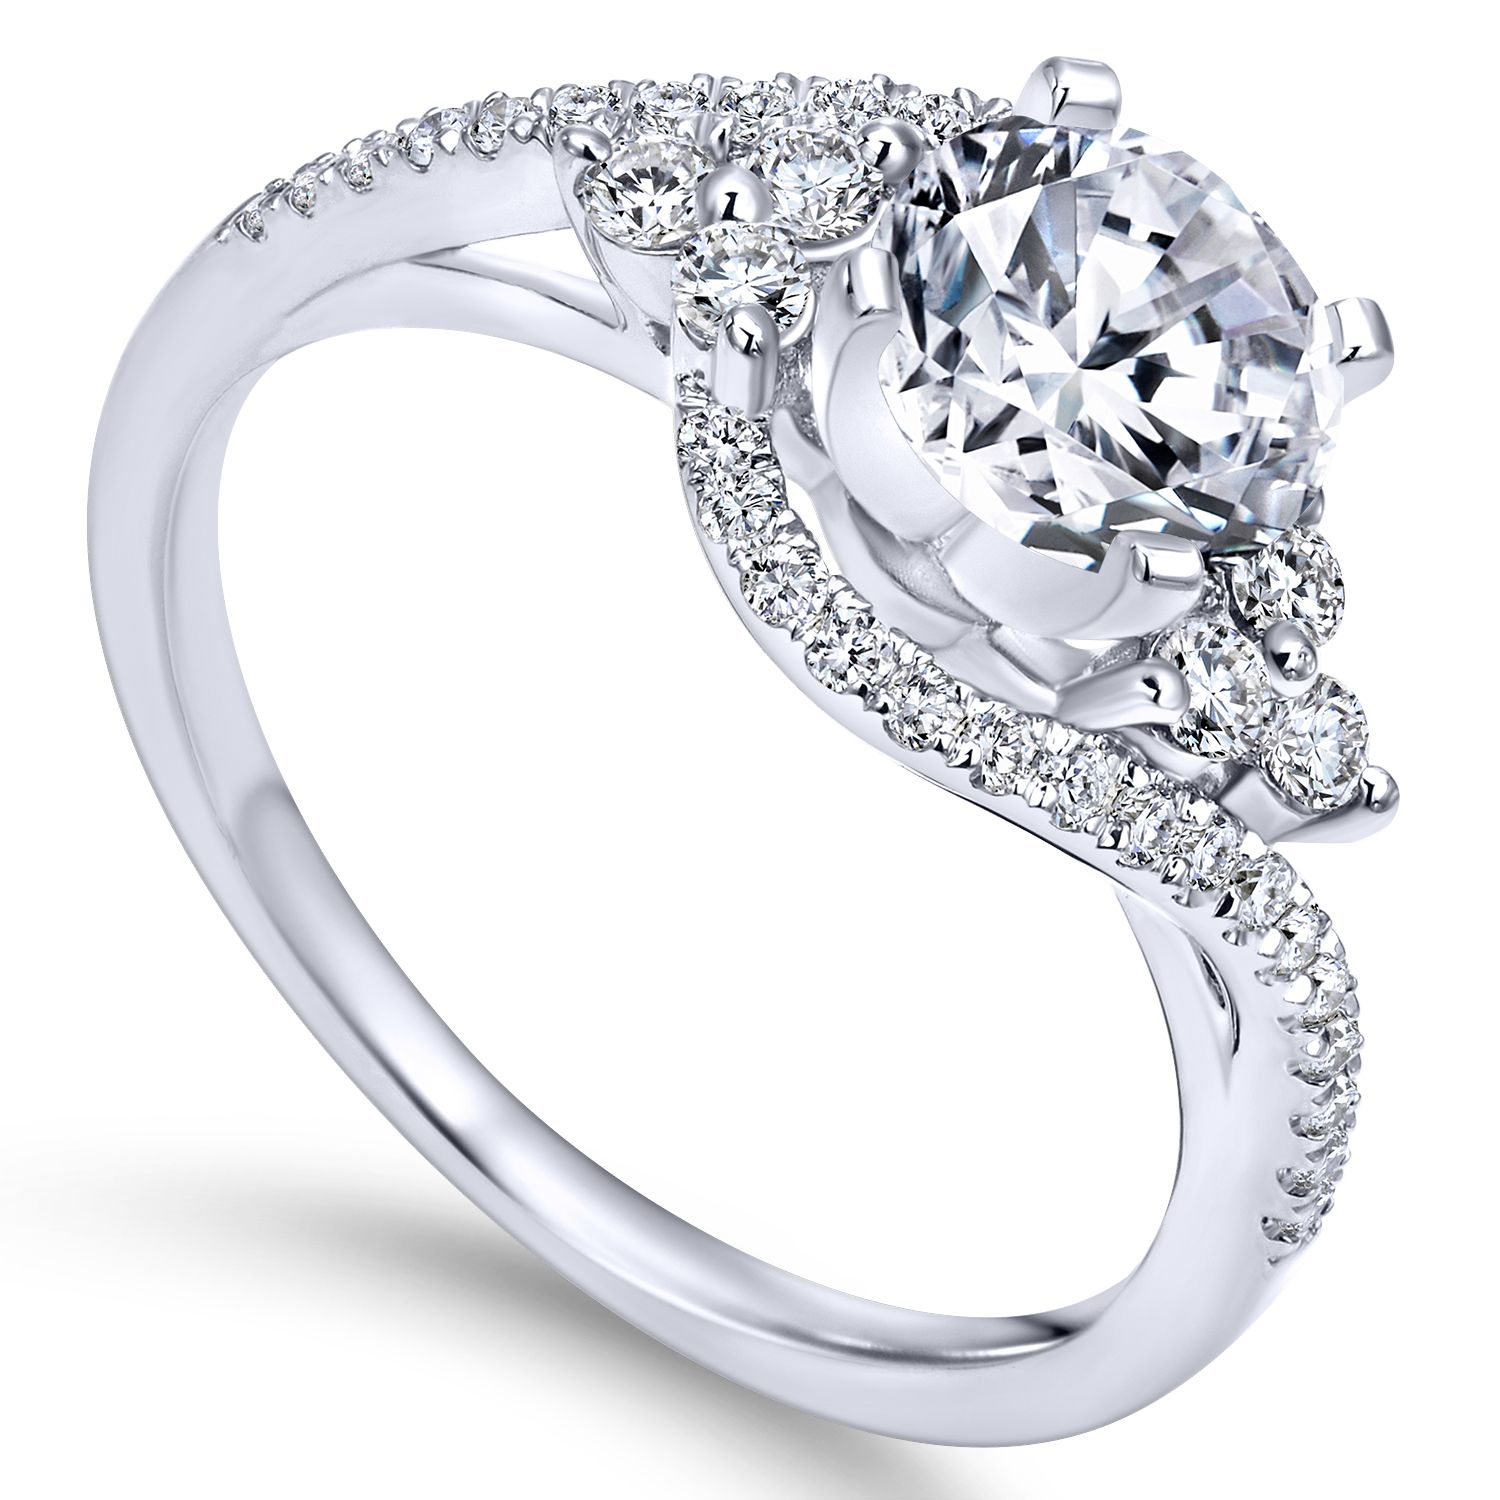 4k White Gold Bypass Engagement Ring Features Two Rows Of De | The Ring  Austin | Round Rock, Tx Regarding Gold Wraparound Rings With Diamonds (View 23 of 25)